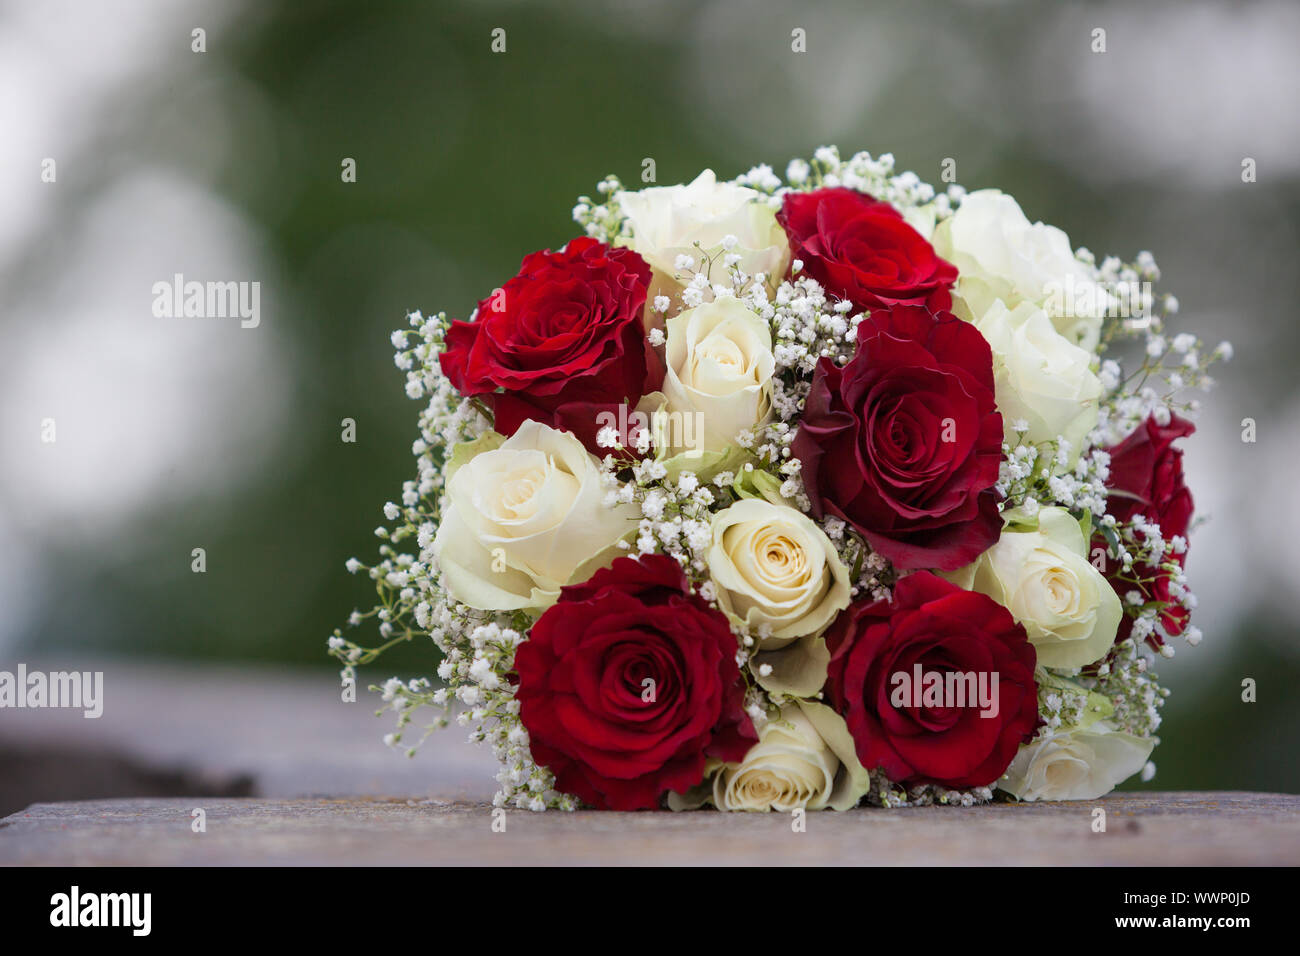 Bridal bouquet white and red roses Stock Photo